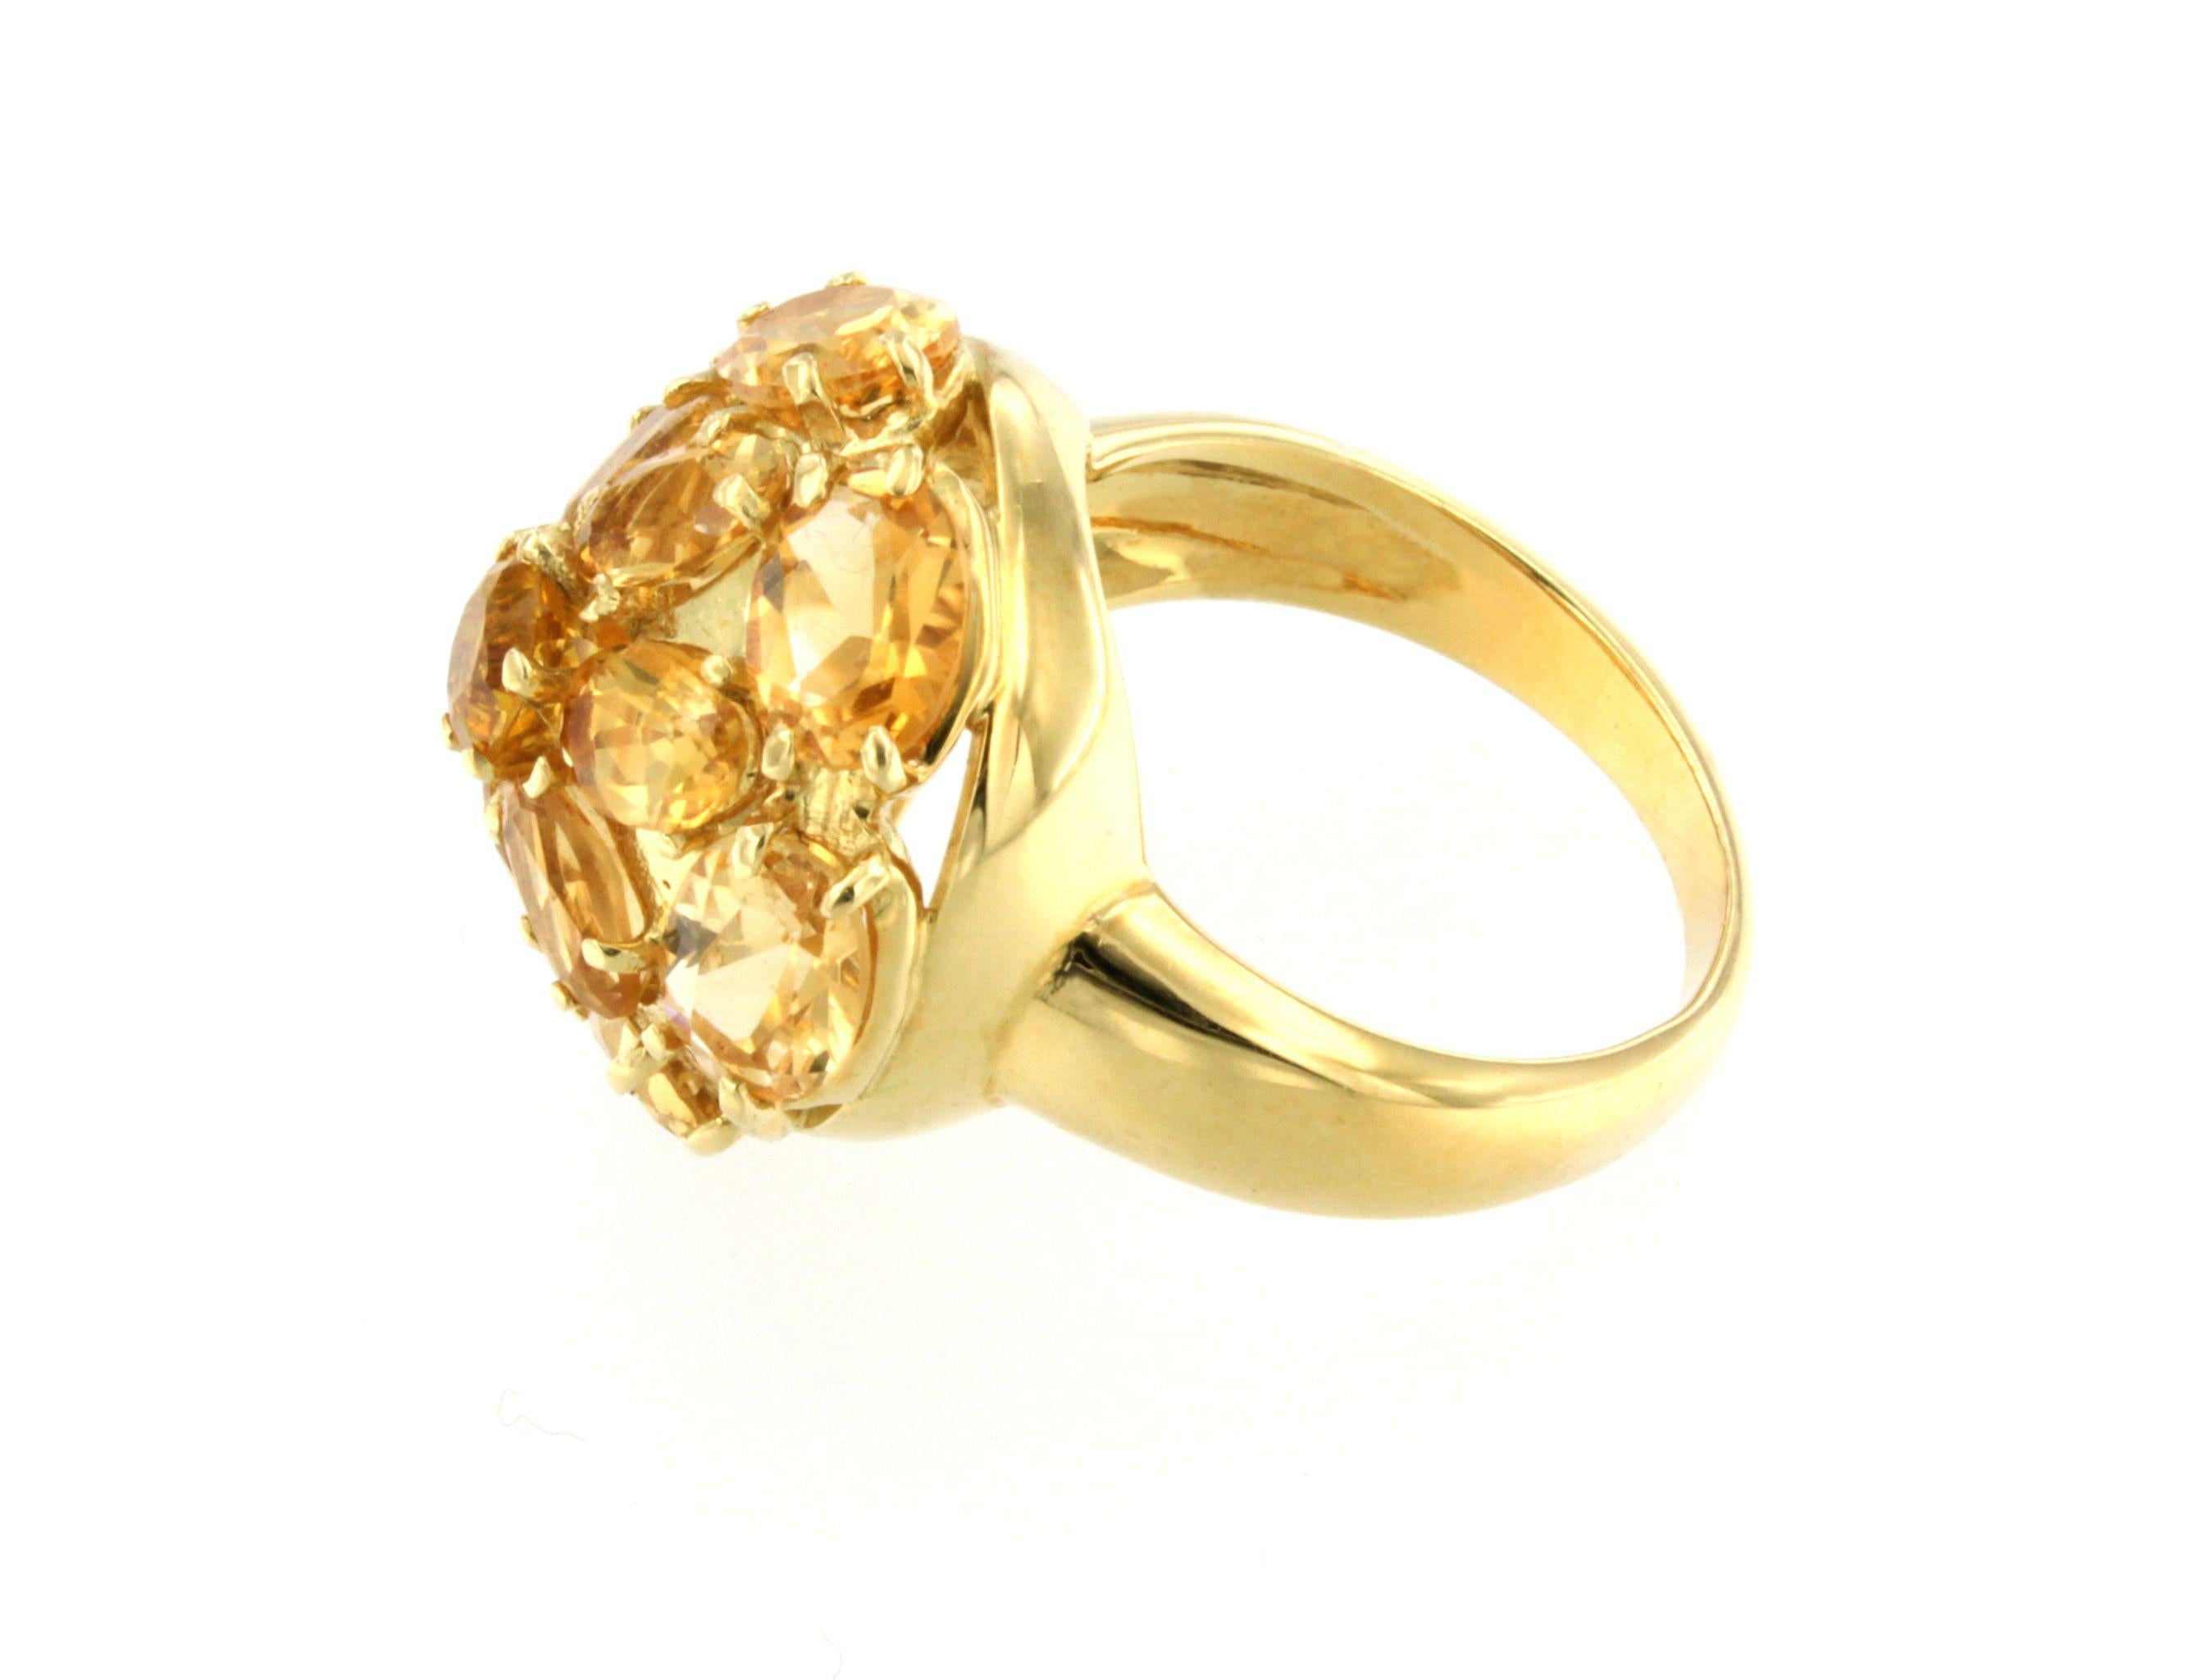 Ring in yellow gold 18kt with Citrine (oval cut, size: mm; round cut, size: mm), made in Italy by Stanoppi Jewellery since 1948.

g.12,00
Size : EU 16 /56   USA 8

All Stanoppi Jewelry is neShiny yellow Sapphire, design and craftmanship handmade in